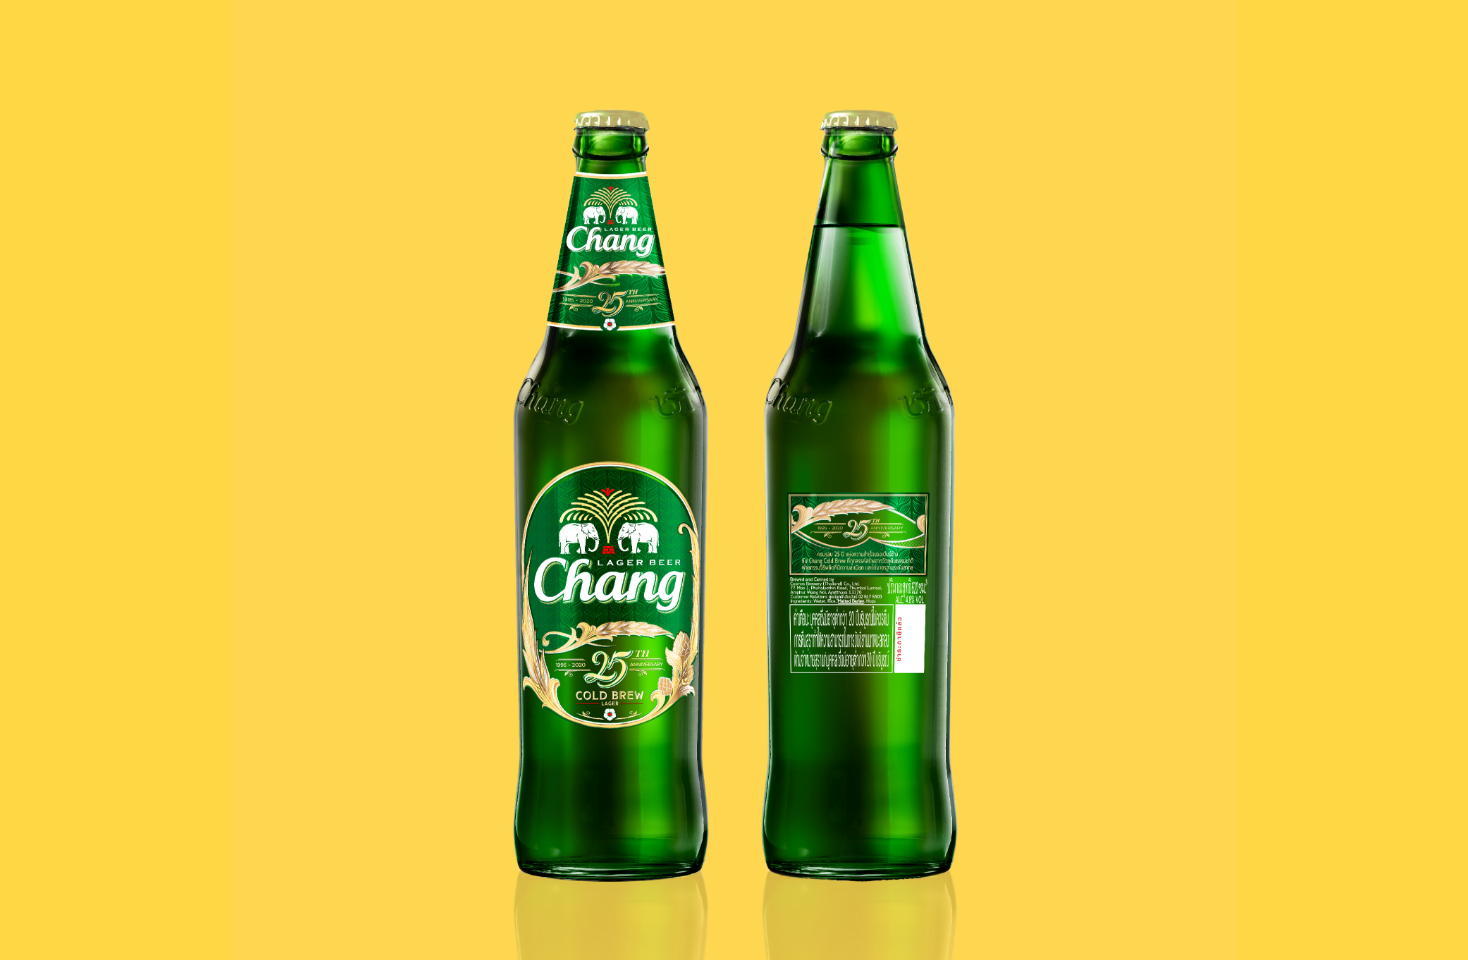 Image of Chang celebrates its 25th anniversary by launching an award-winning special edition